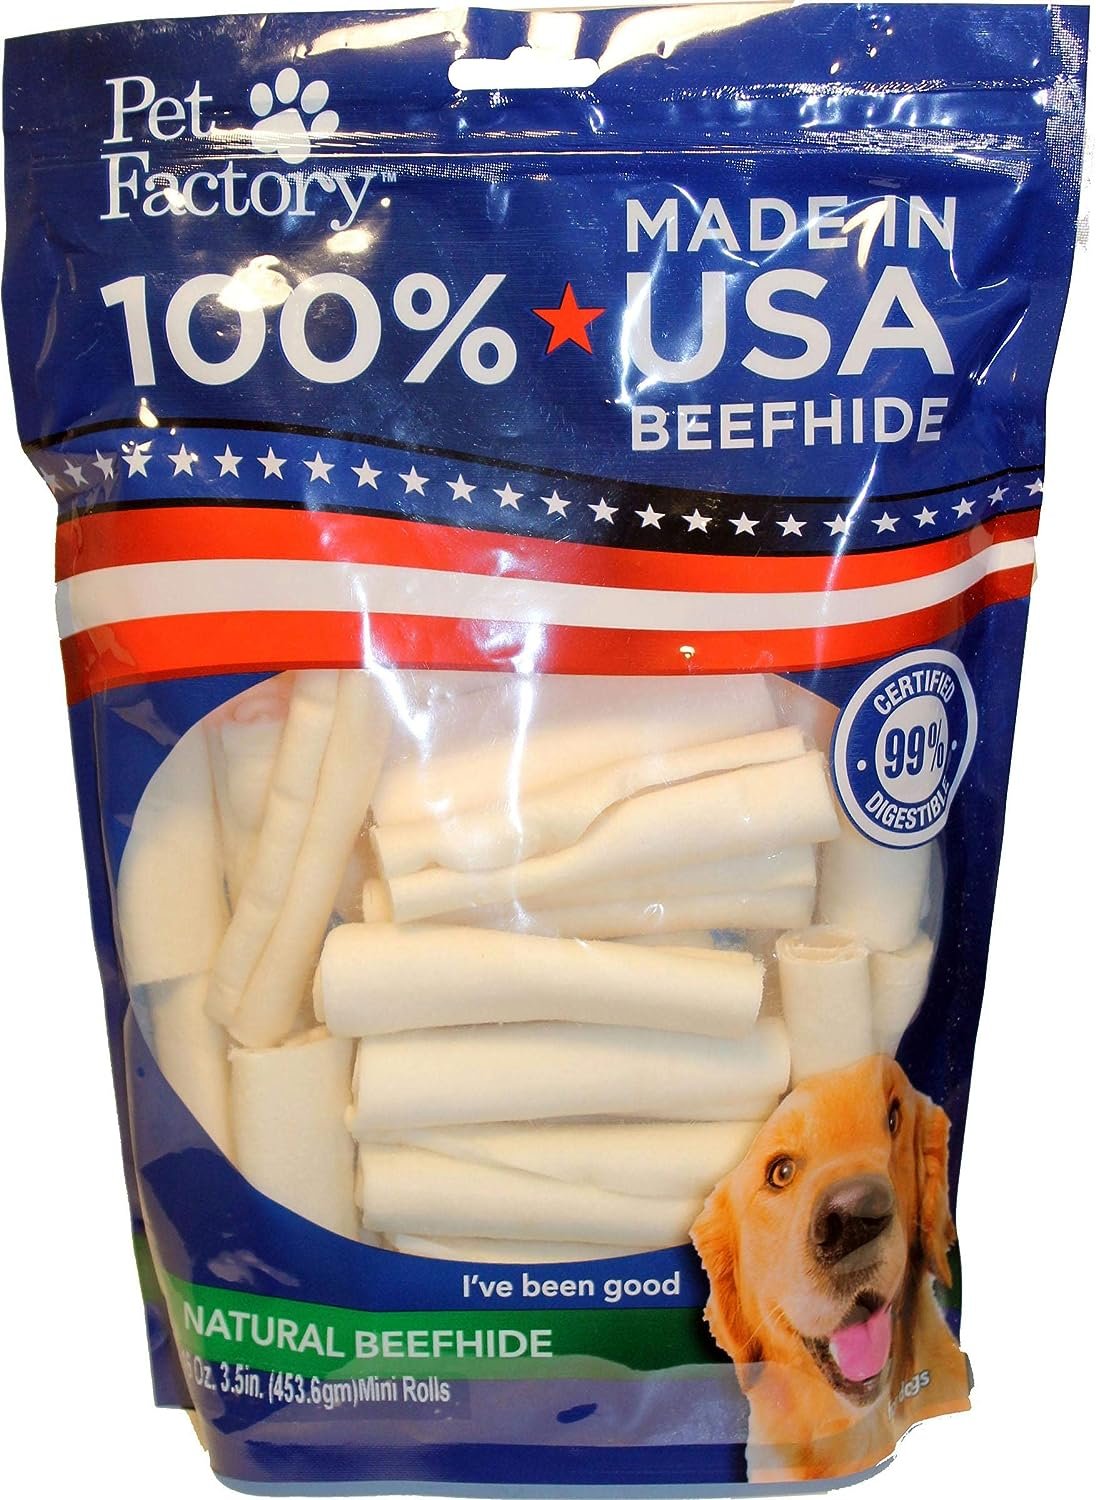 Pet Factory 78121 Beefhide | Dog Chews, 99% Digestive, Rawhides to Keep Dogs Busy While Enjoying, 100% Natural Flavored Rolls, 1 Pound Pack 3-3.5 Size, Made in USA